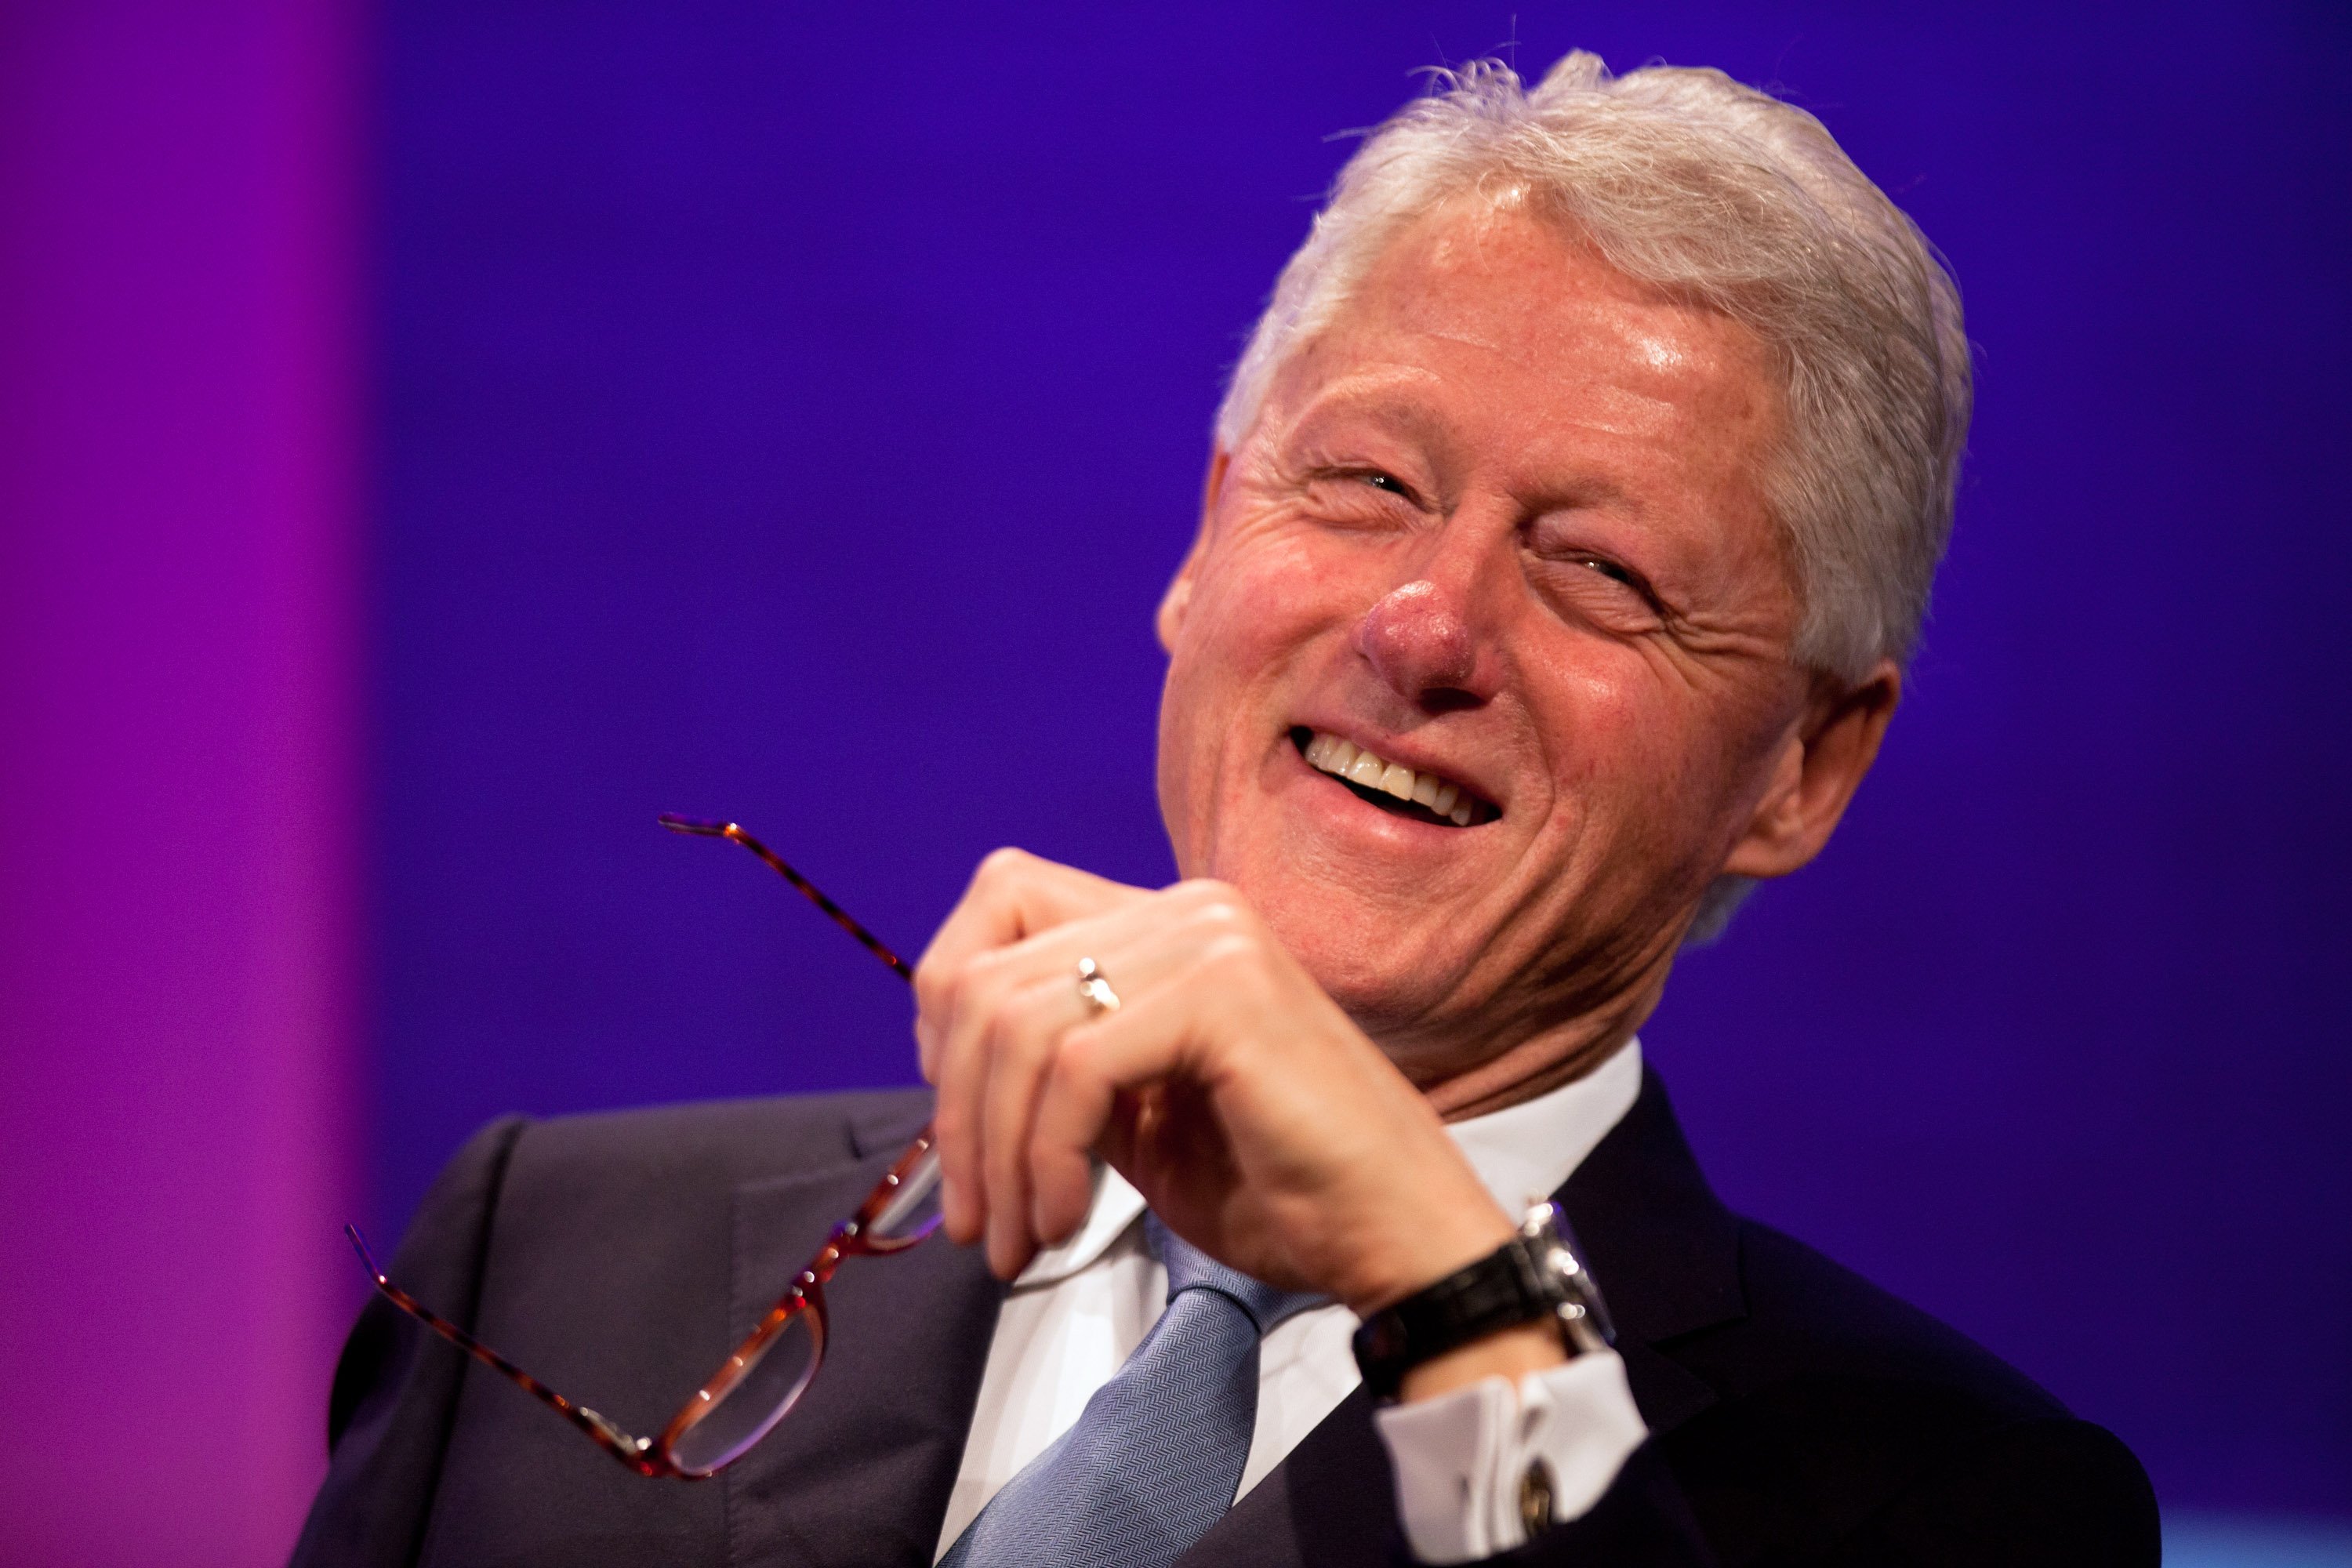 Bill Clinton at the Leaders Dialogue on Climate Change at the Sheraton New York Hotel on September 20, 2011 in New York City | Photo: Getty Images